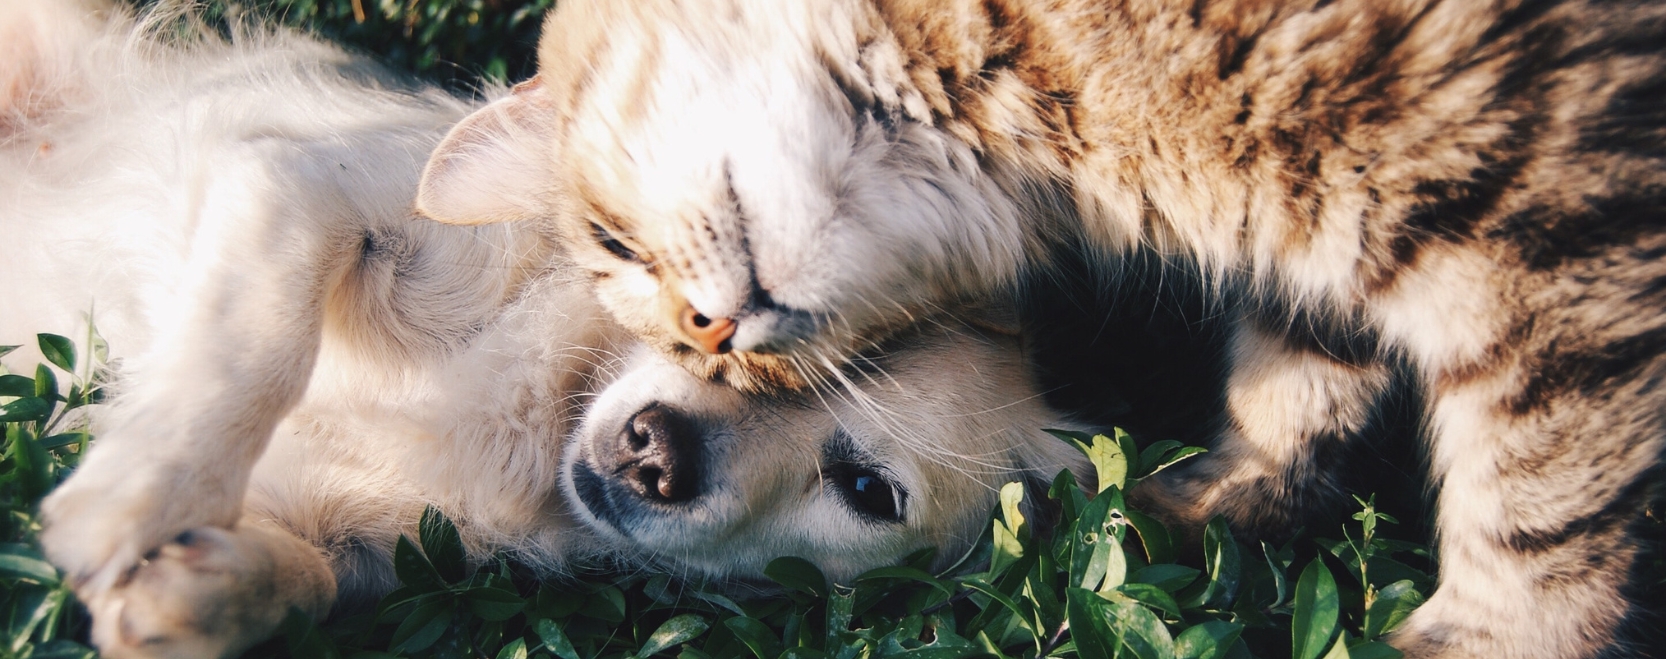 Cat and Dog Hugging